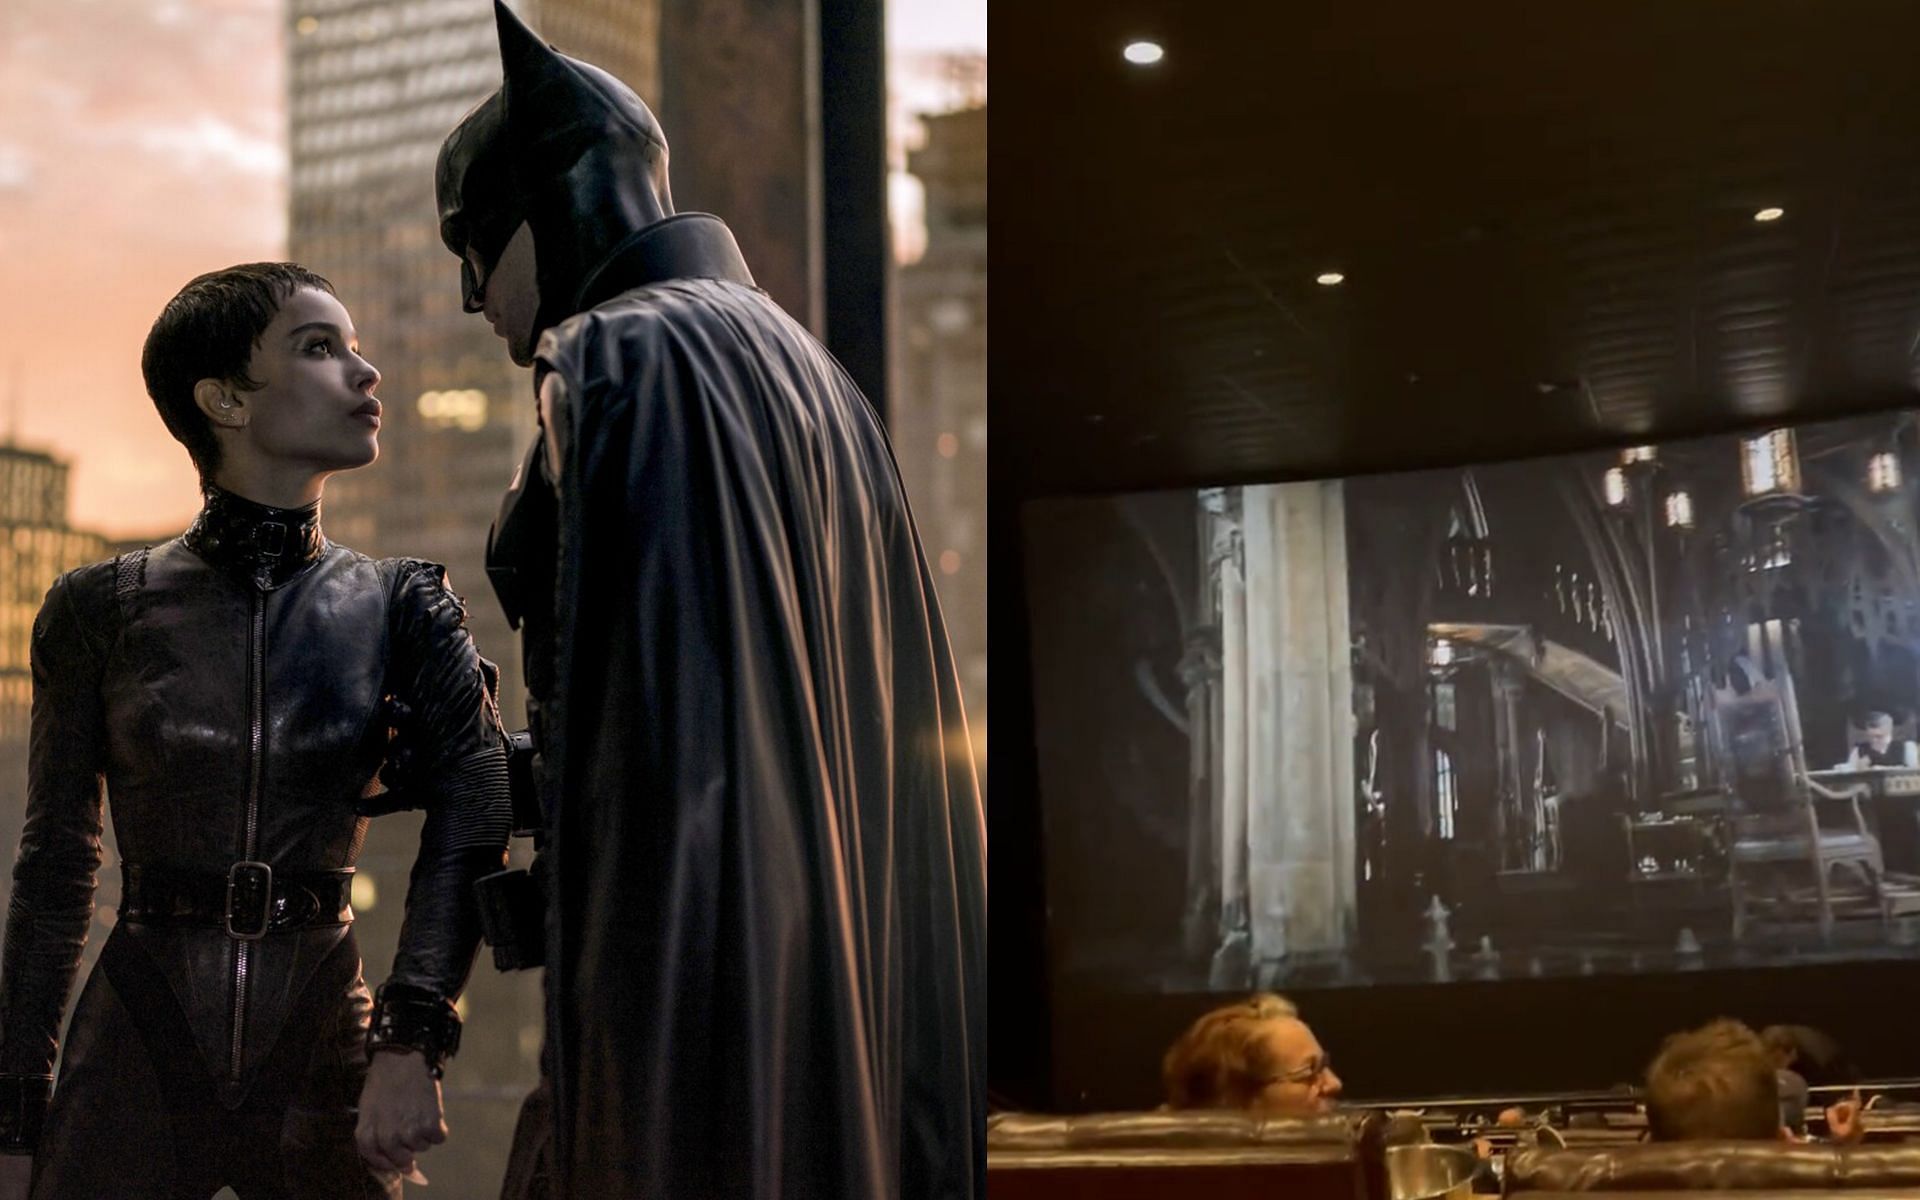 The Batman playing in a theater as live bats show up (Image via LA Times and Twitter)